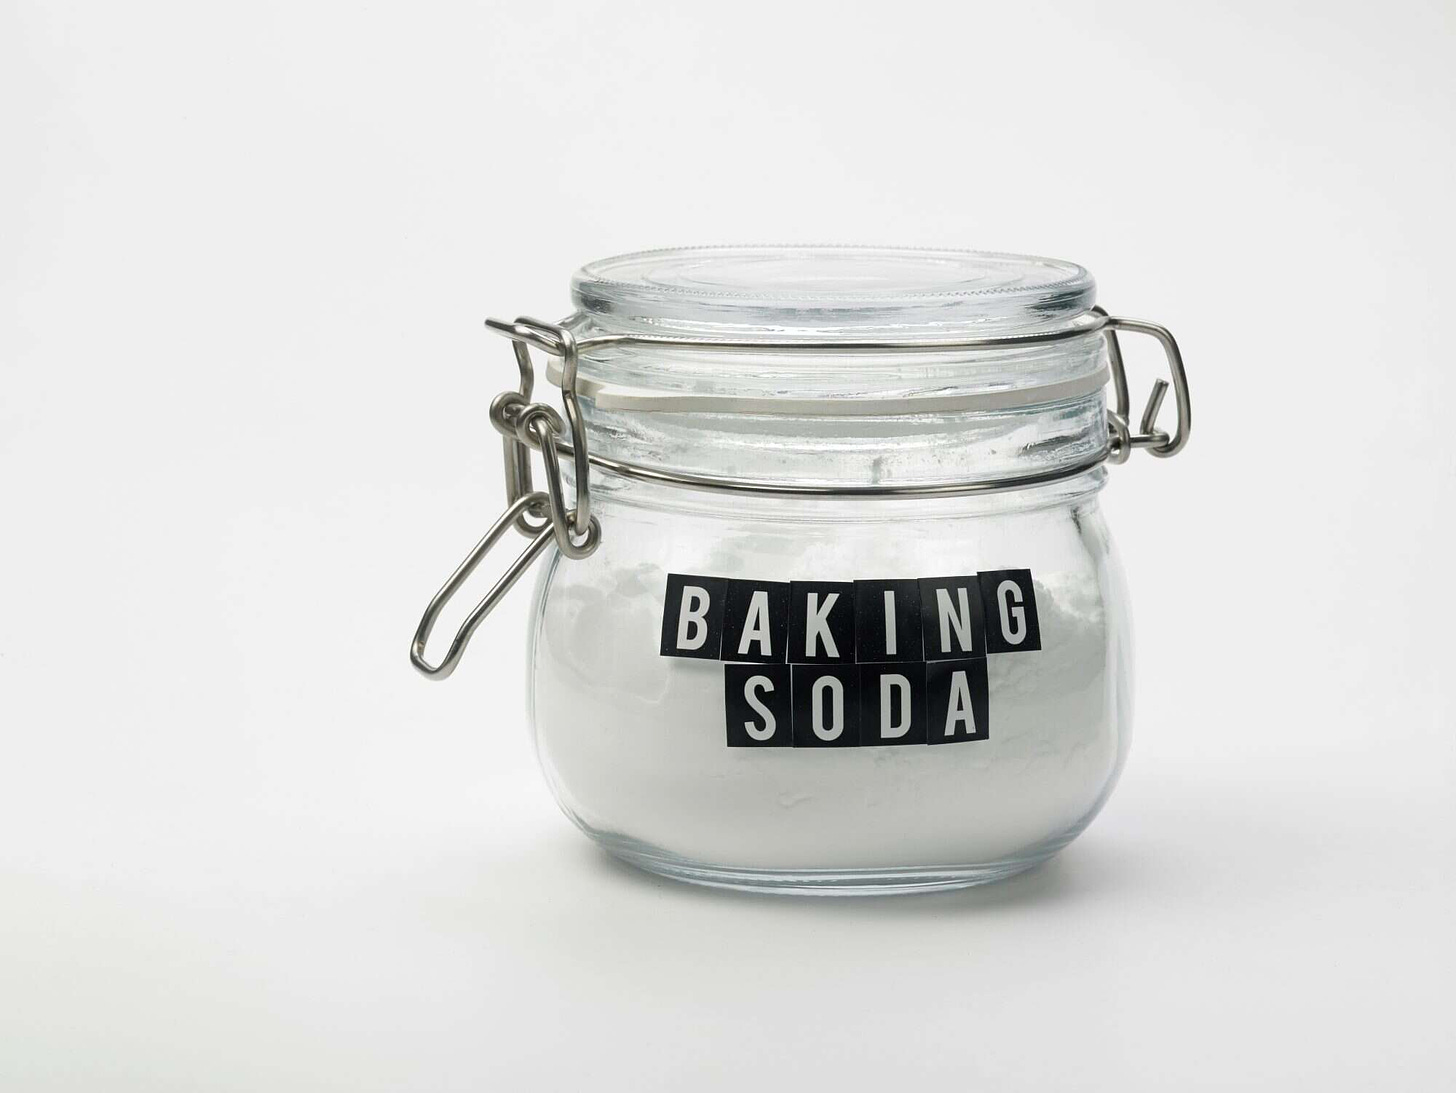 Baking Soda Substitute: What Can You Use Instead? | Allrecipes